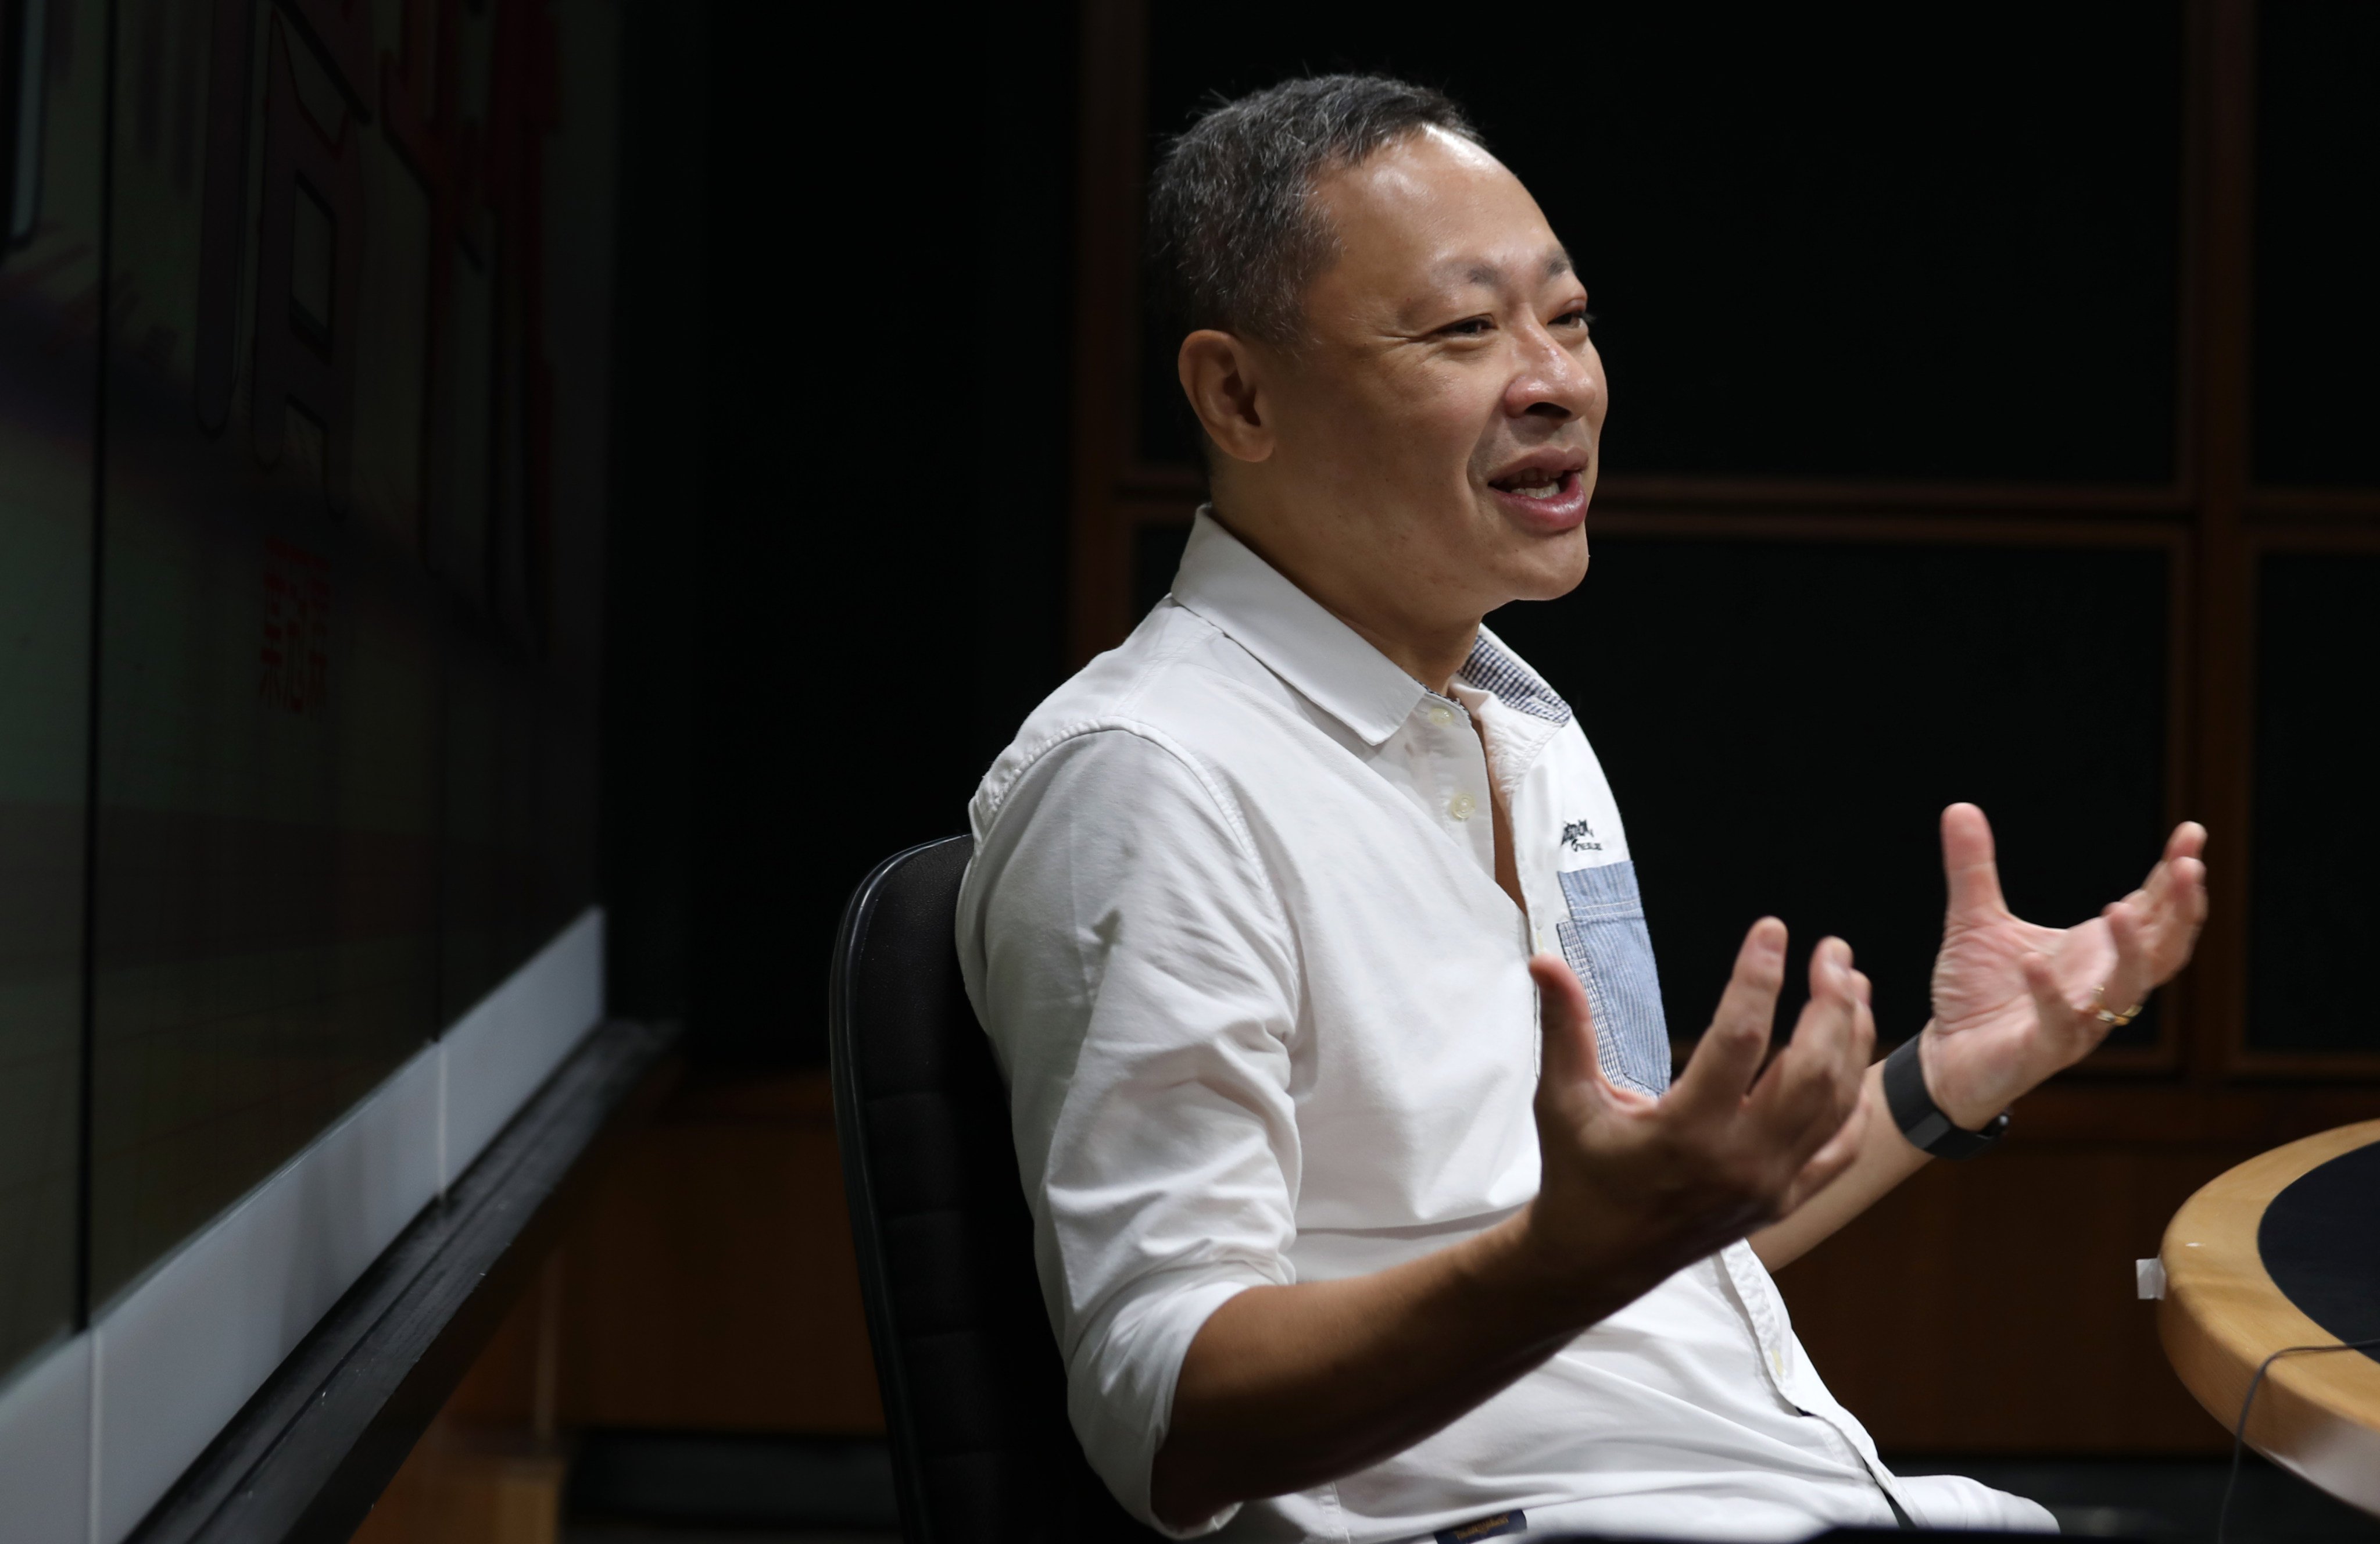 Benny Tai has always been an advocate for non-violence, his lawyer has argued. Photo: Xiaomei Chen